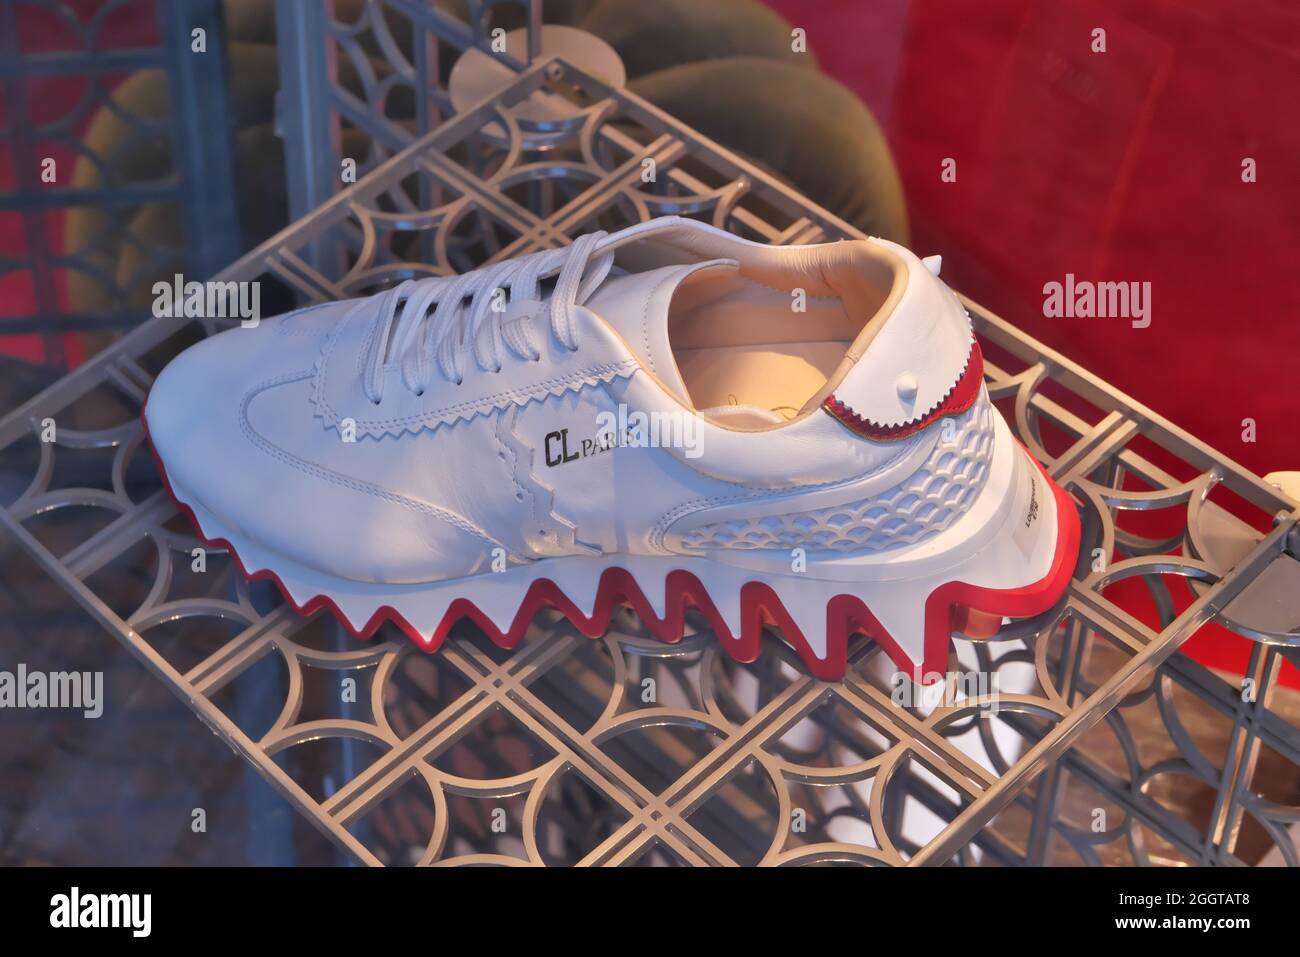 SHOES ON DISPLAY AT CHRISTIAN LOUBOUTIN FASHION BOUTIQUE Stock Photo - Alamy